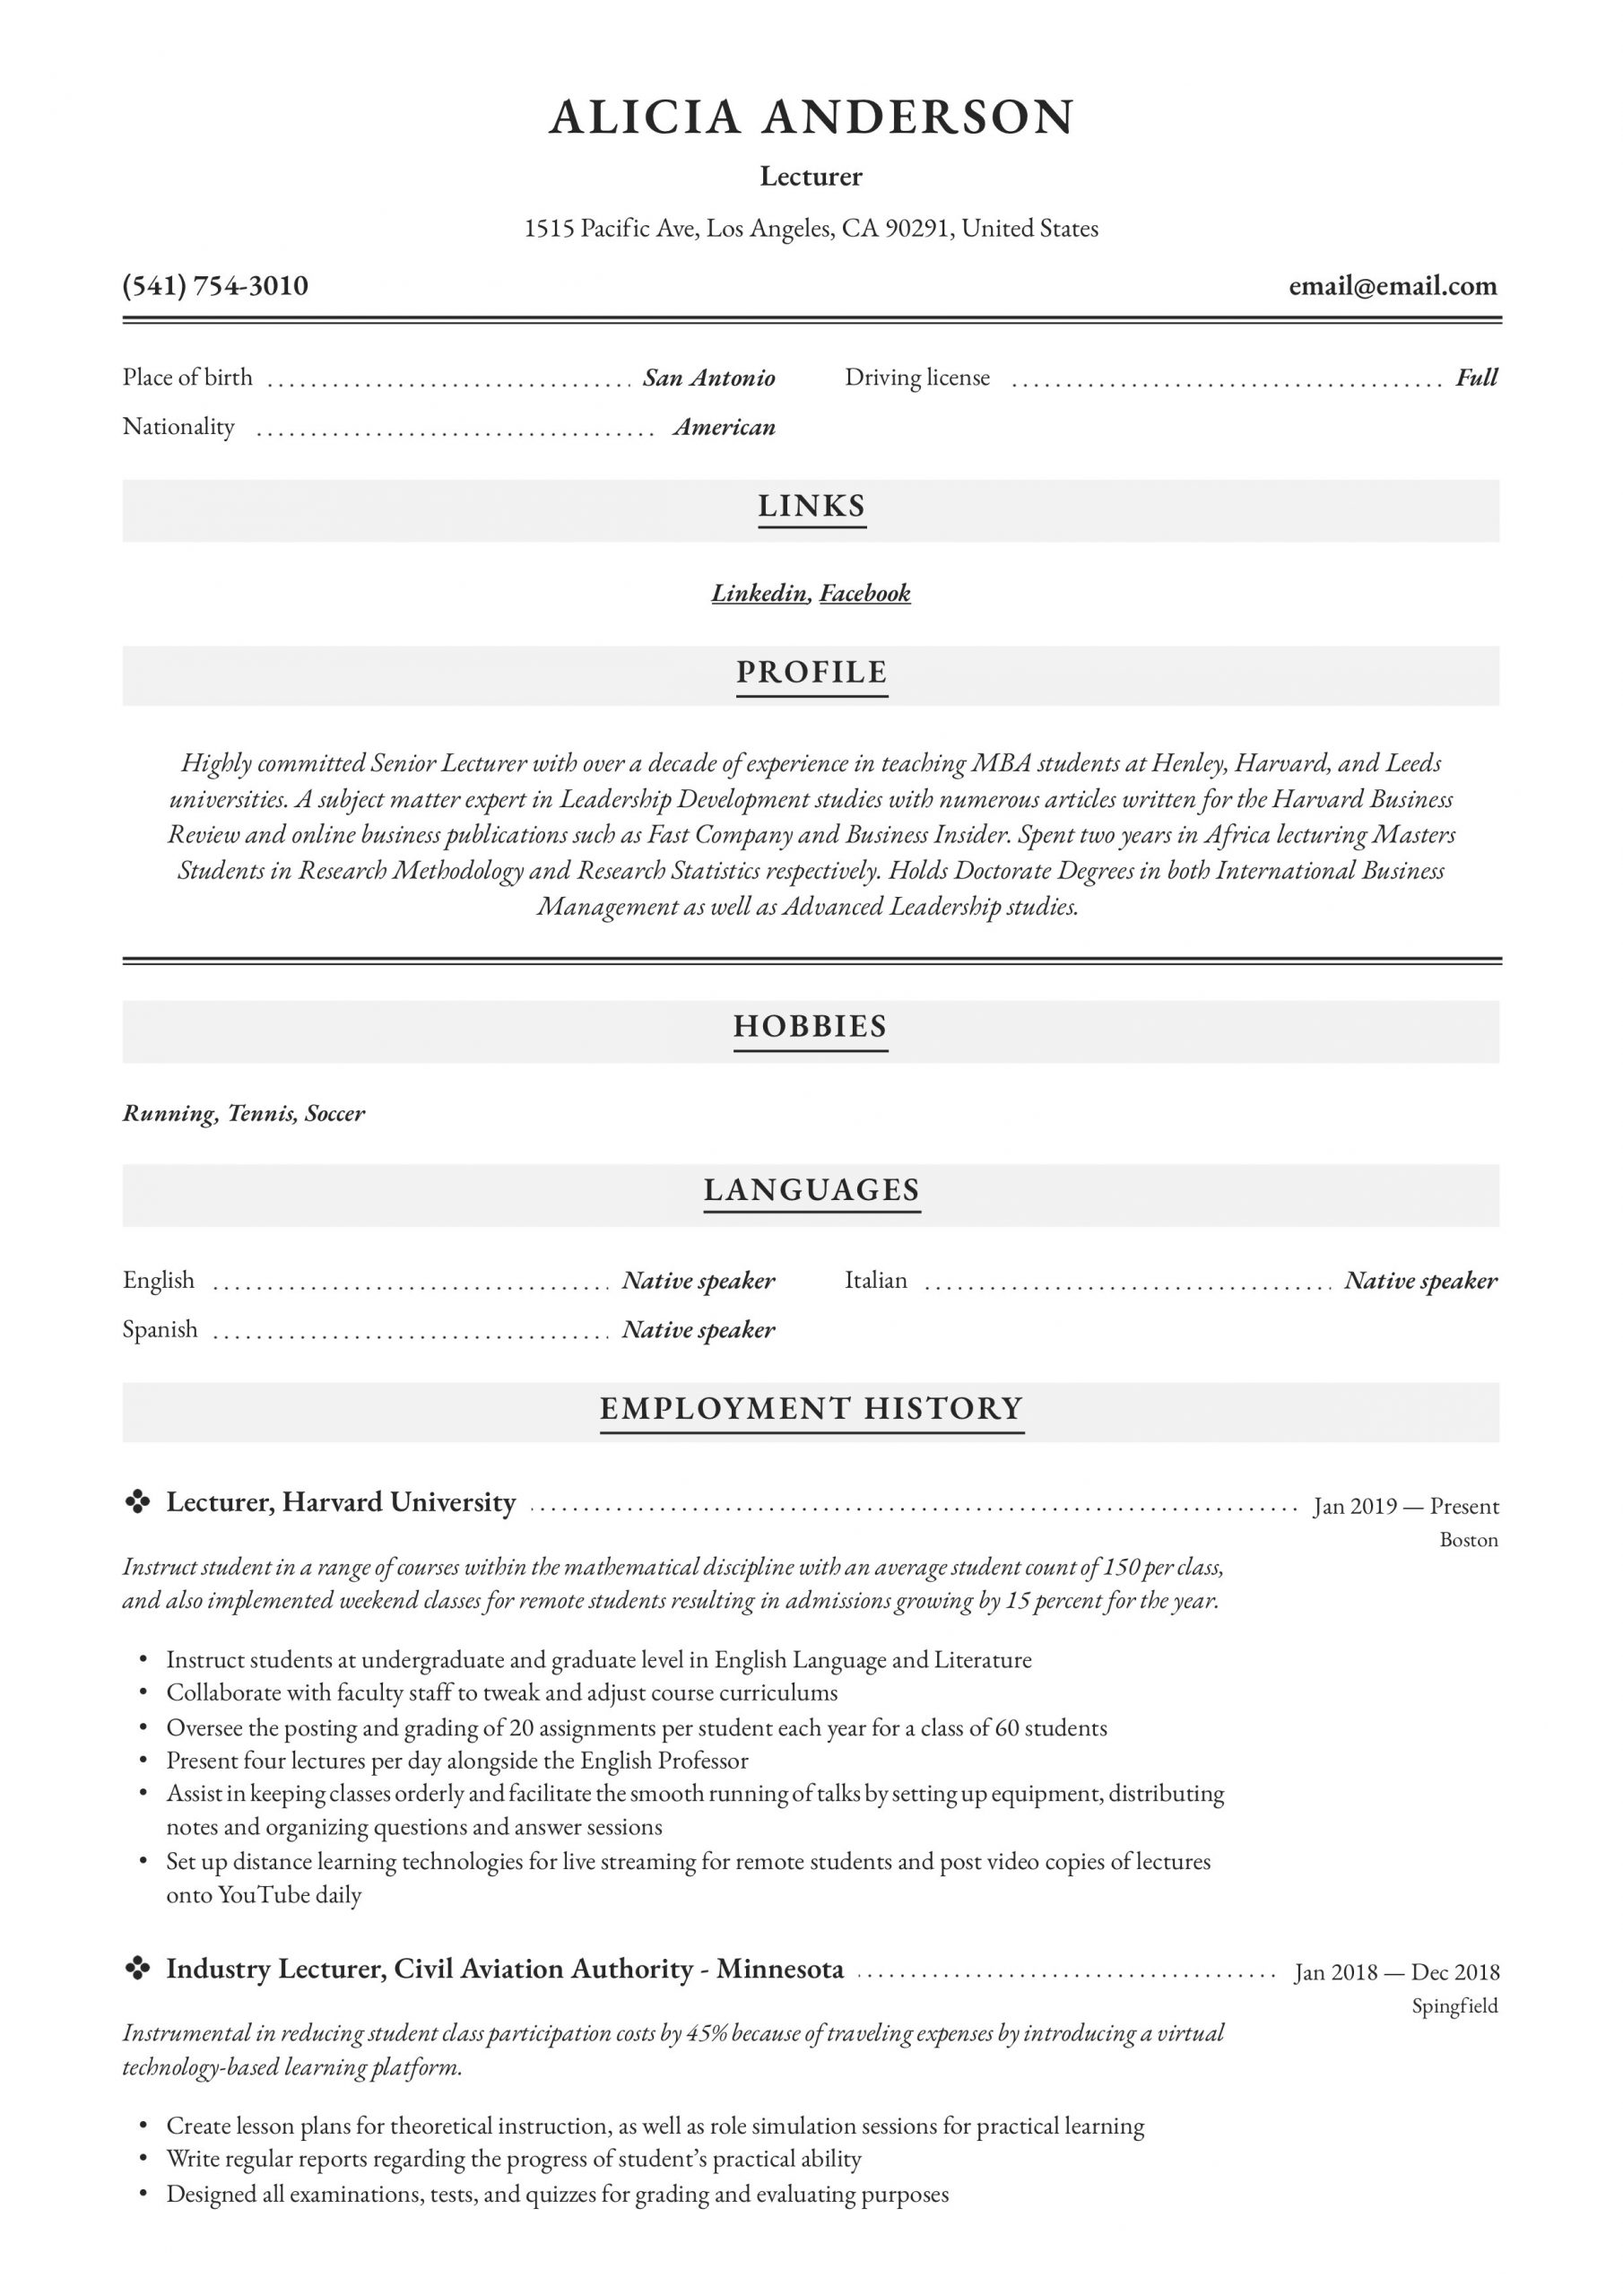 Lecturer Jobs Resume Sample for Freshers Lecturer Resume & Writing Guide  18 Free Examples 2020